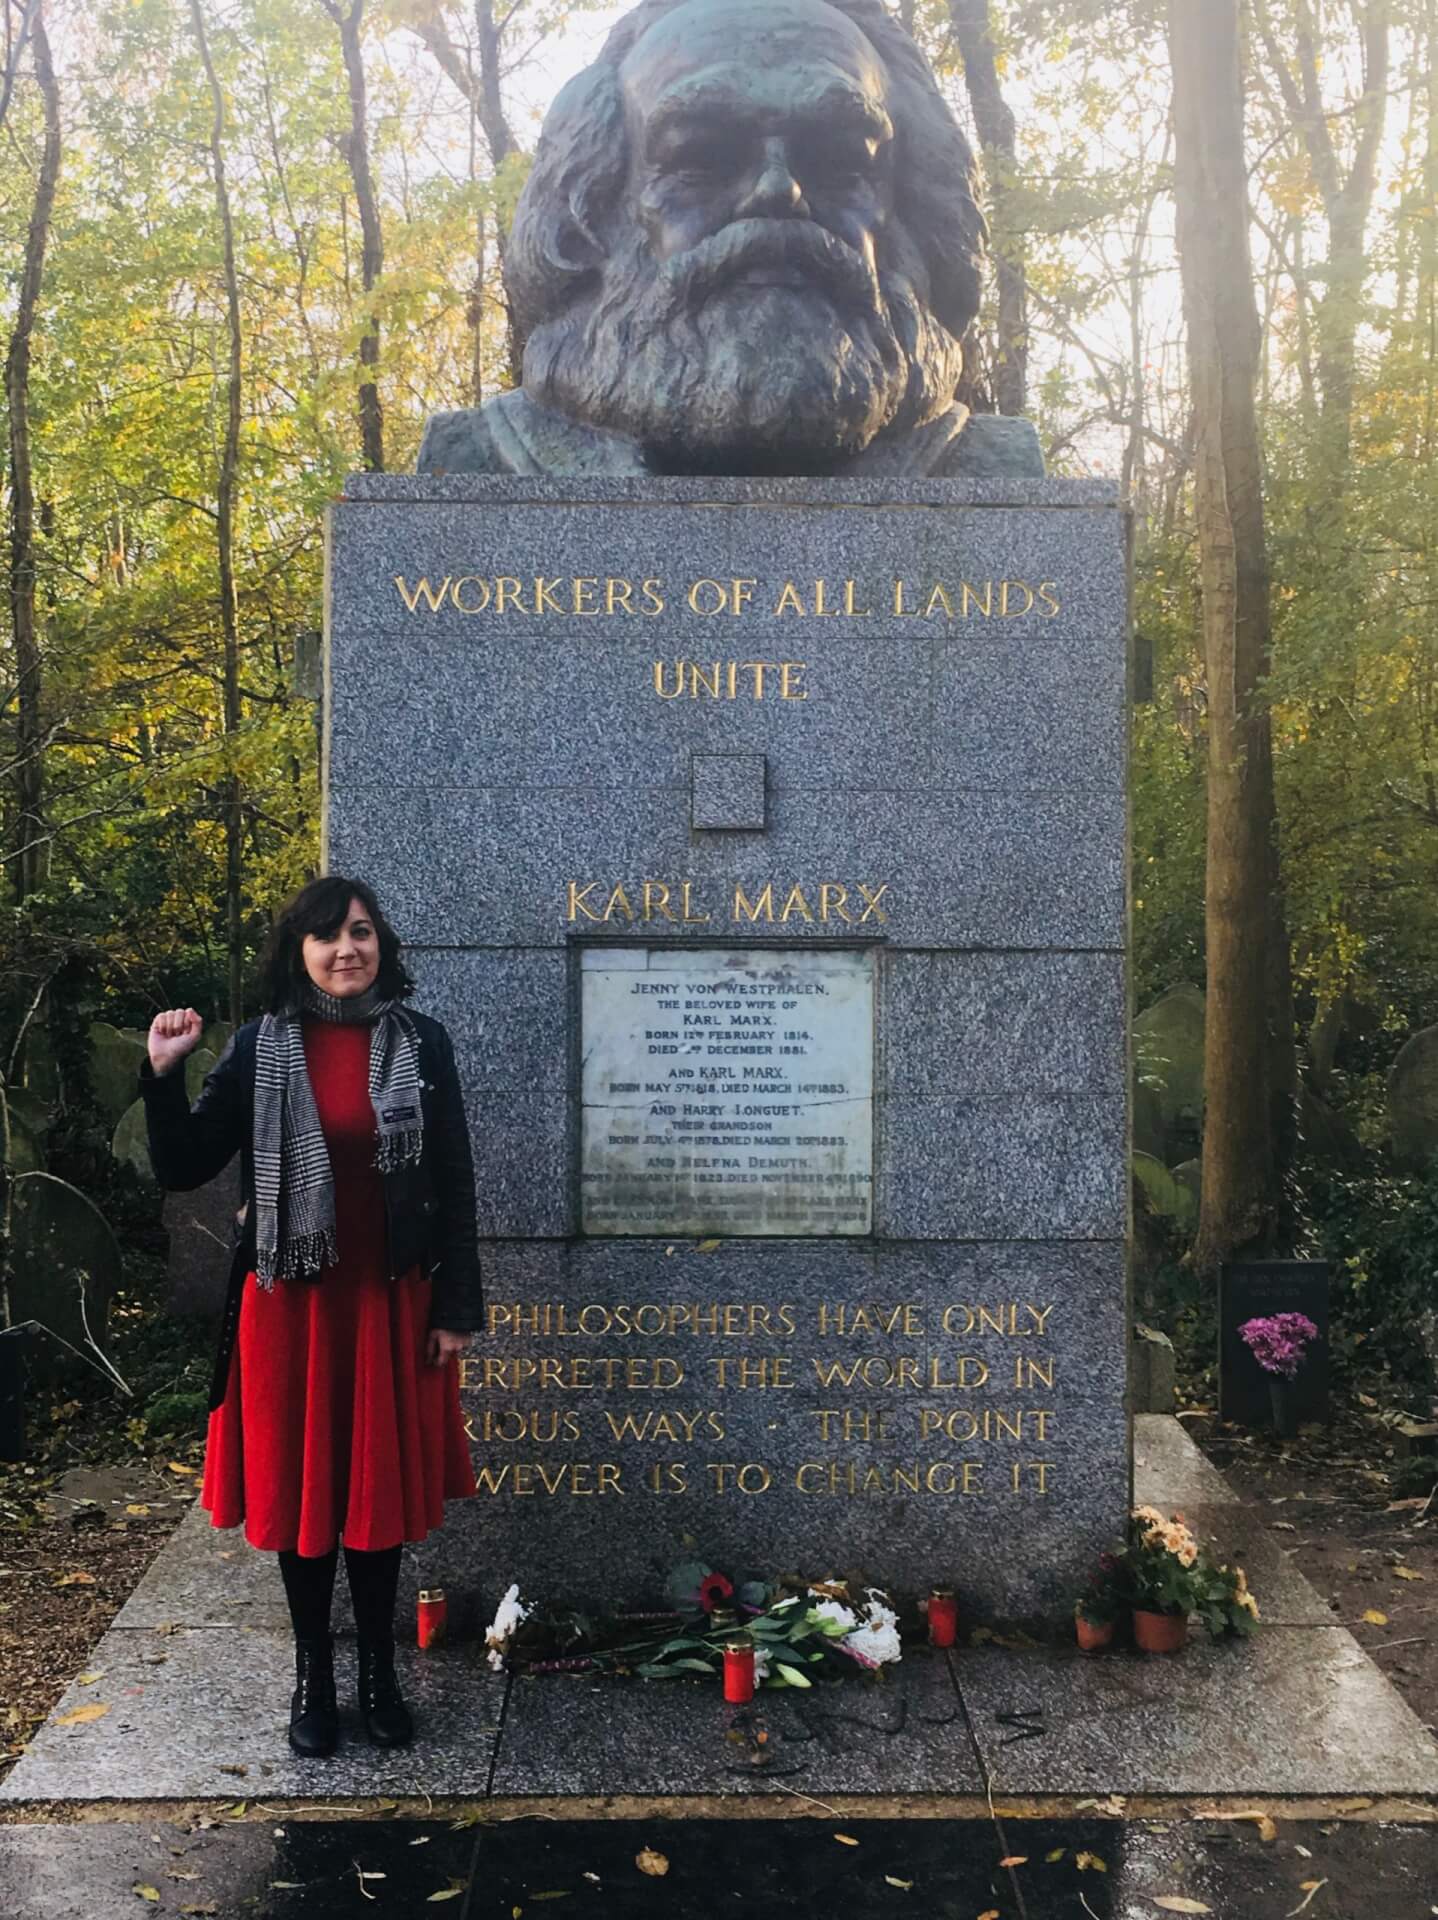 Professor Natalie Suzelis stands with a raised fist next to the massive marble tombstone of Karl Marx